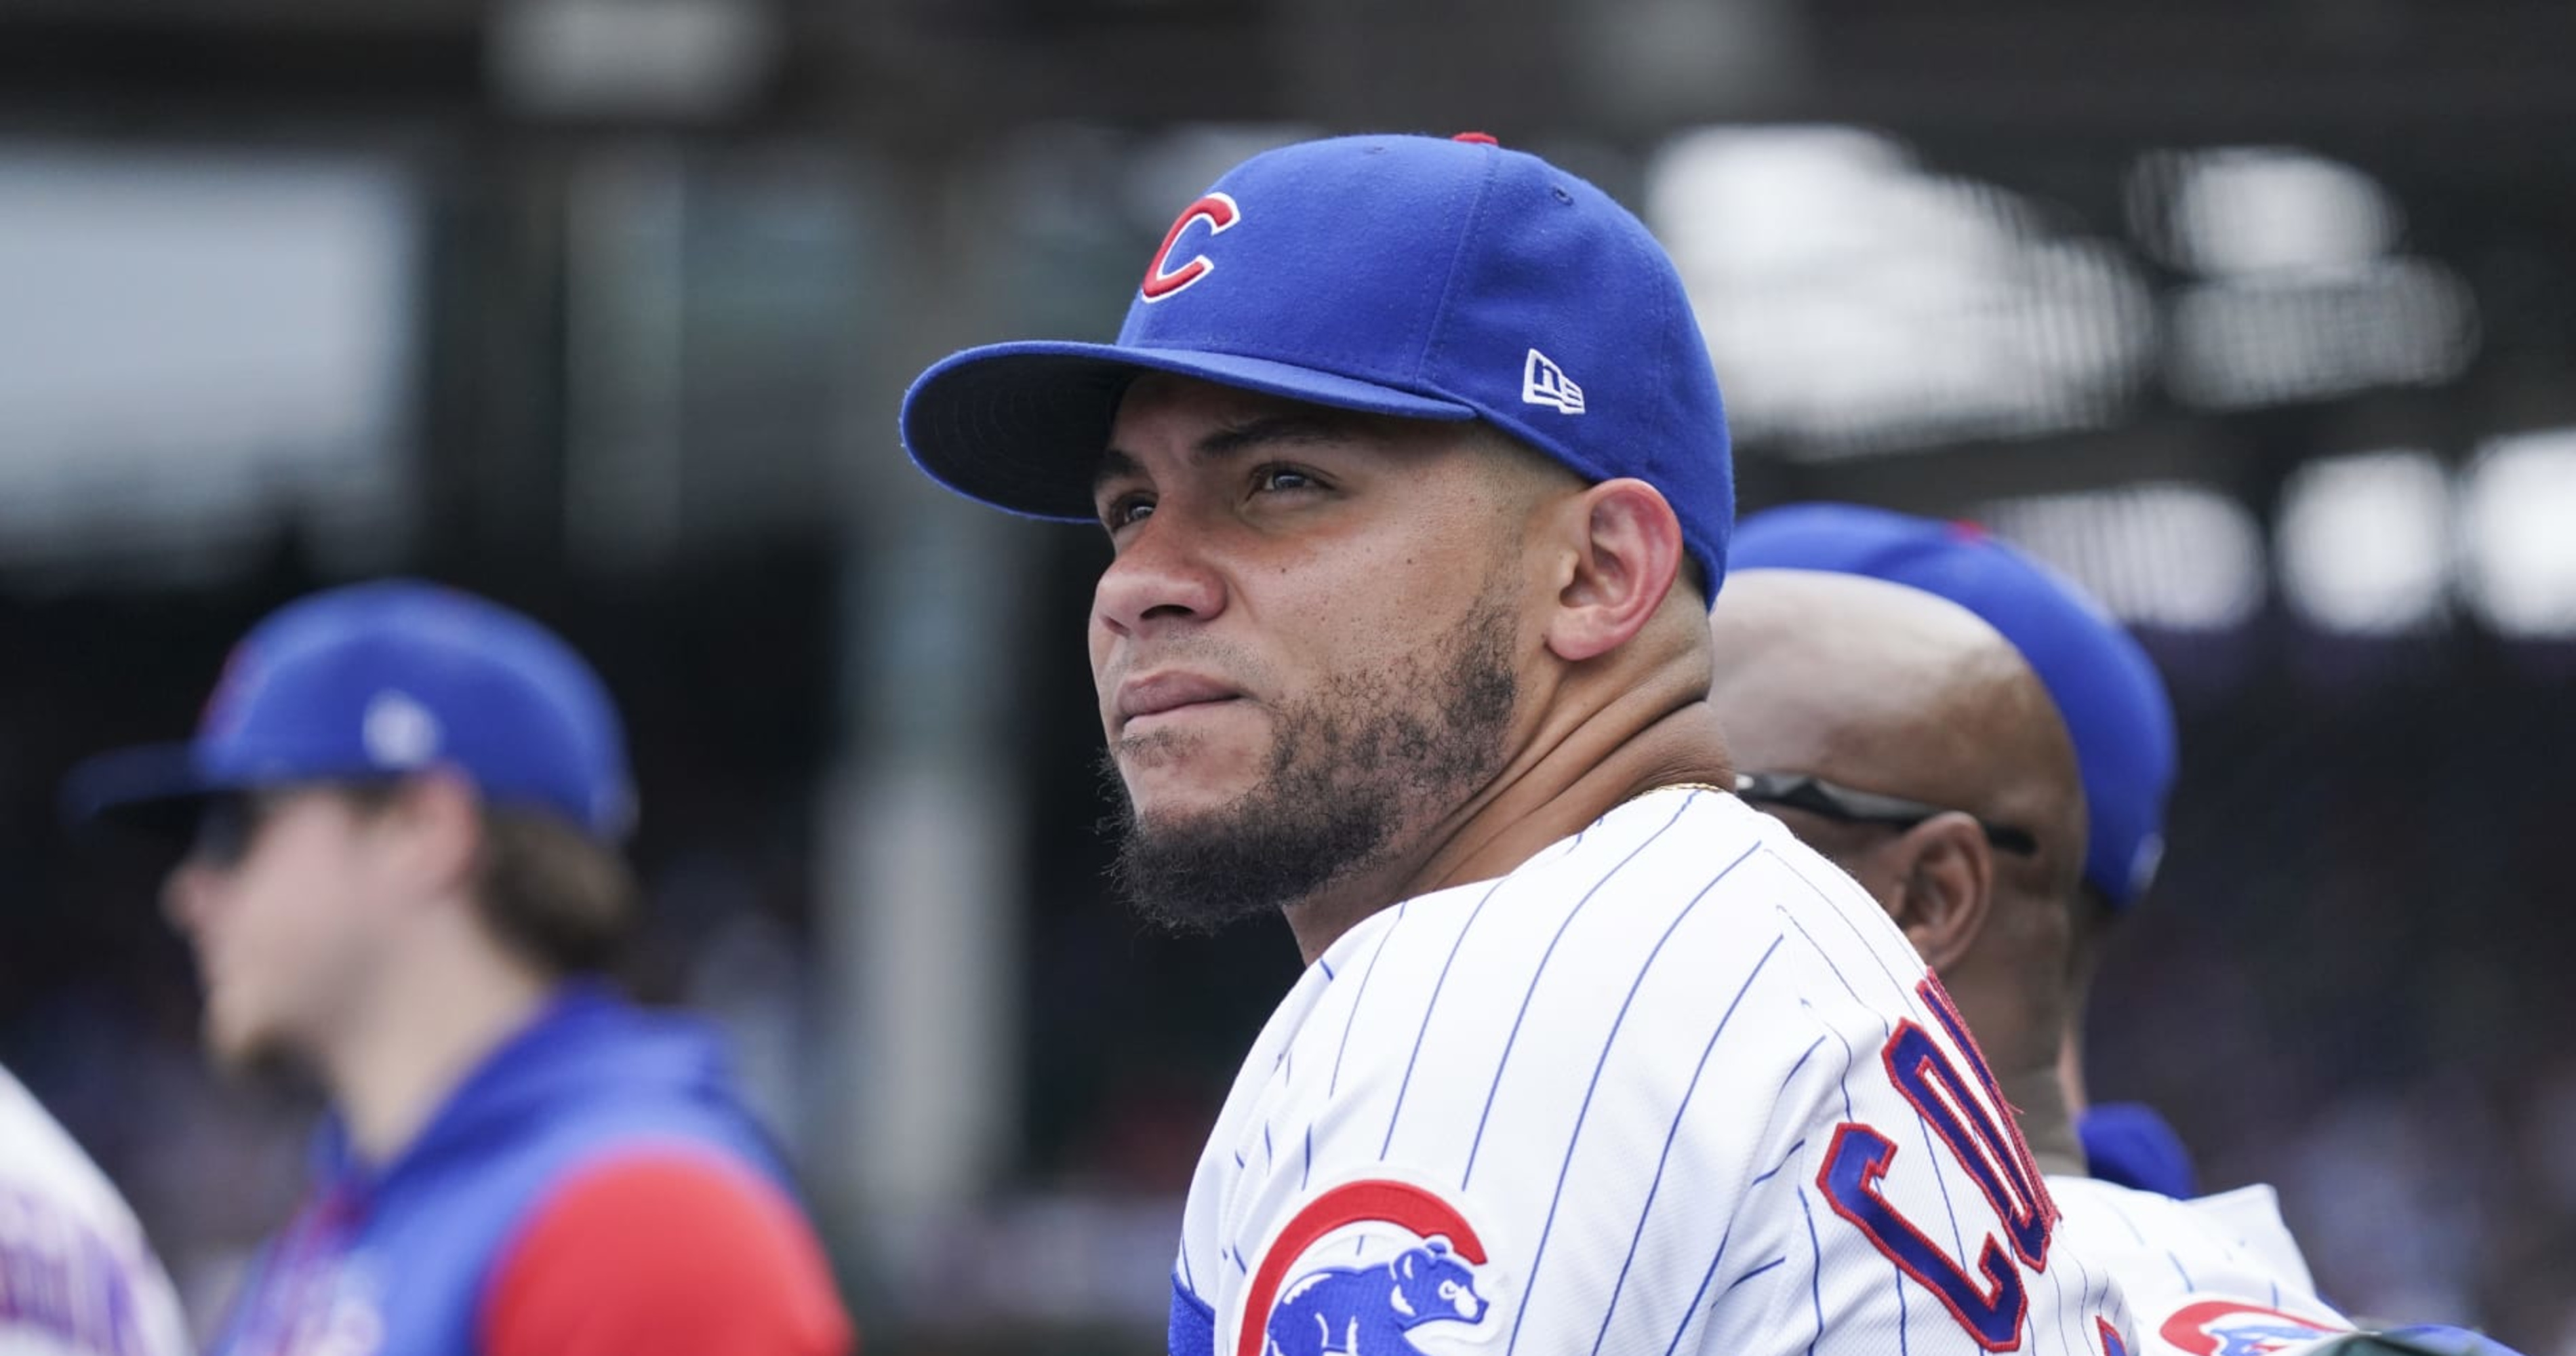 Report: Cubs discuss Contreras trade with multiple teams